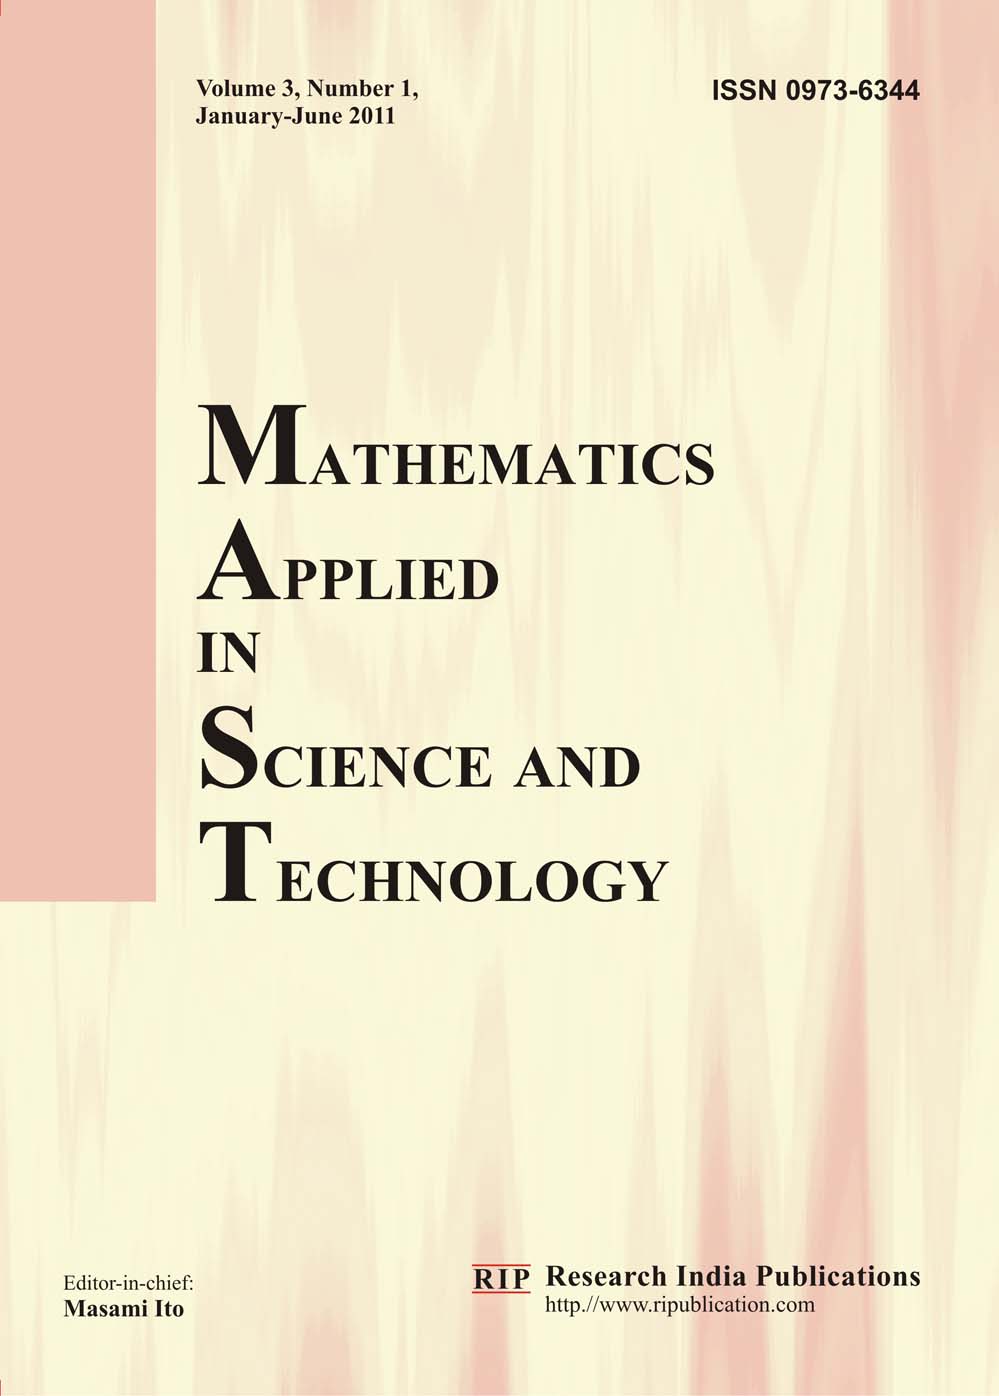 Mathematics research papers india